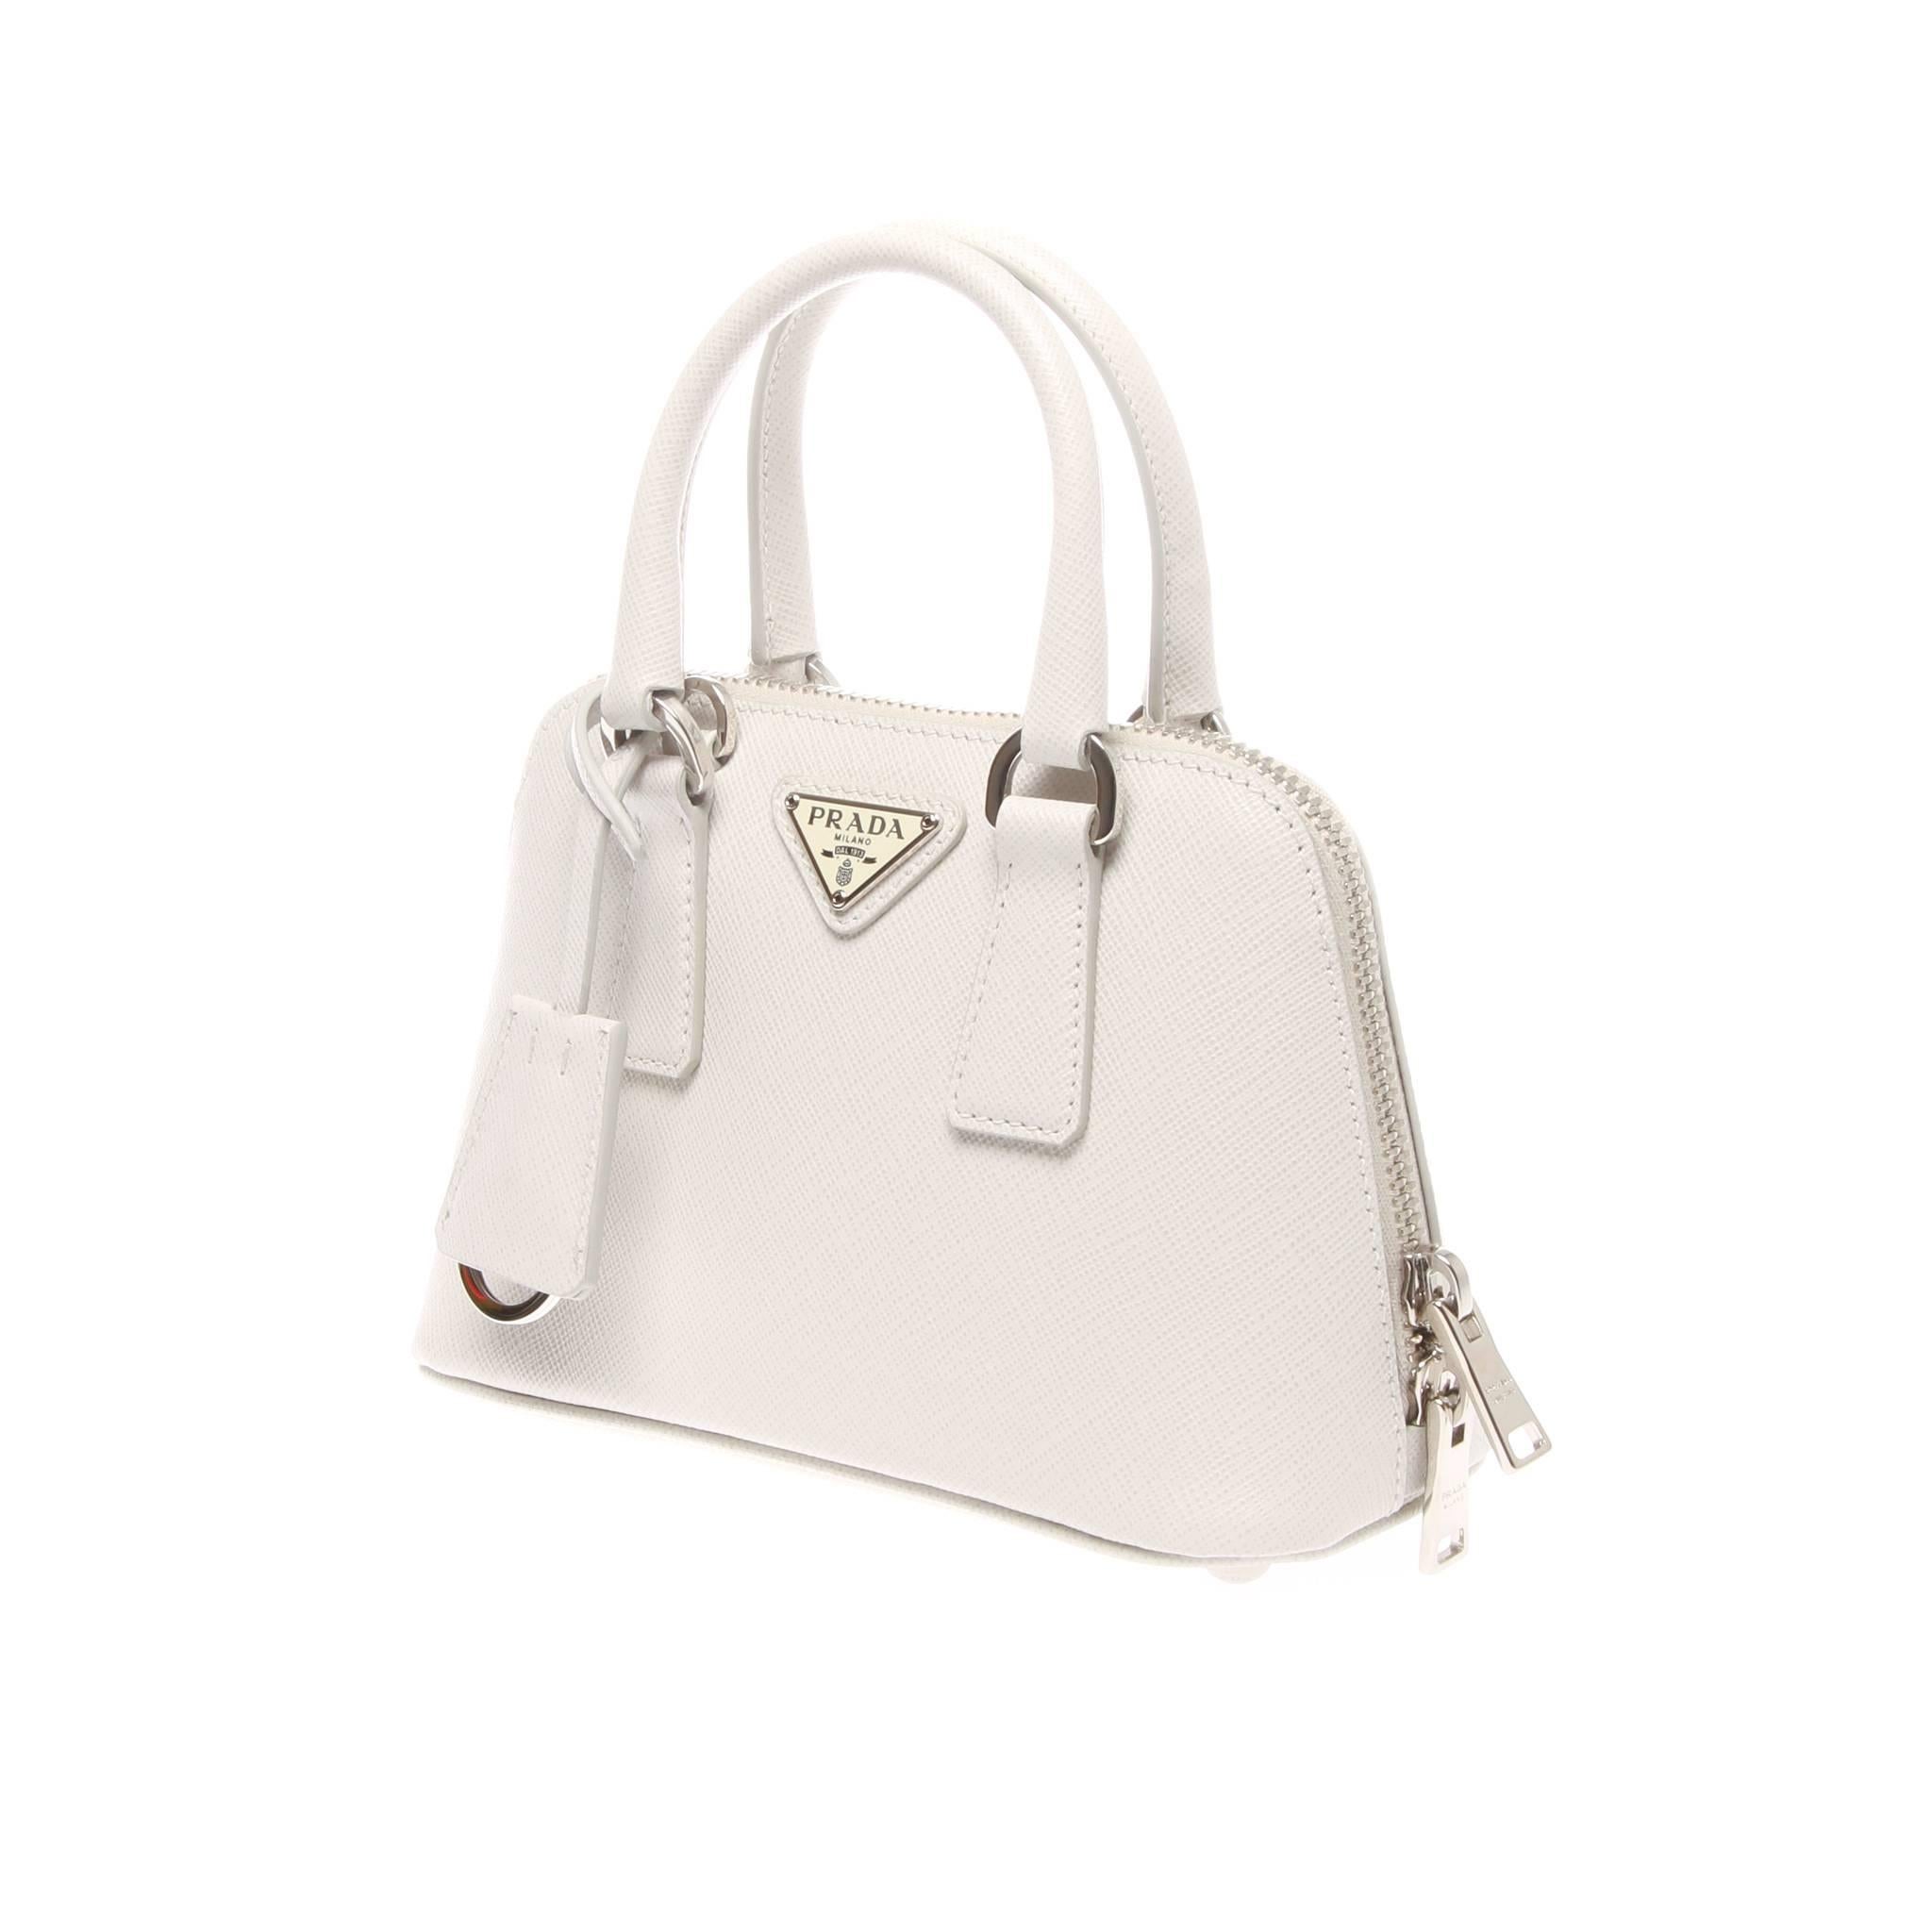 Prada Saffiano Lux Mini Promenade Bag

Beautifully structured in a dome silhouette, this petite satchel features luxe metallic Saffiano calf leather and an optional strap for wearing cross body.
It features double top handles, 2½" drop,